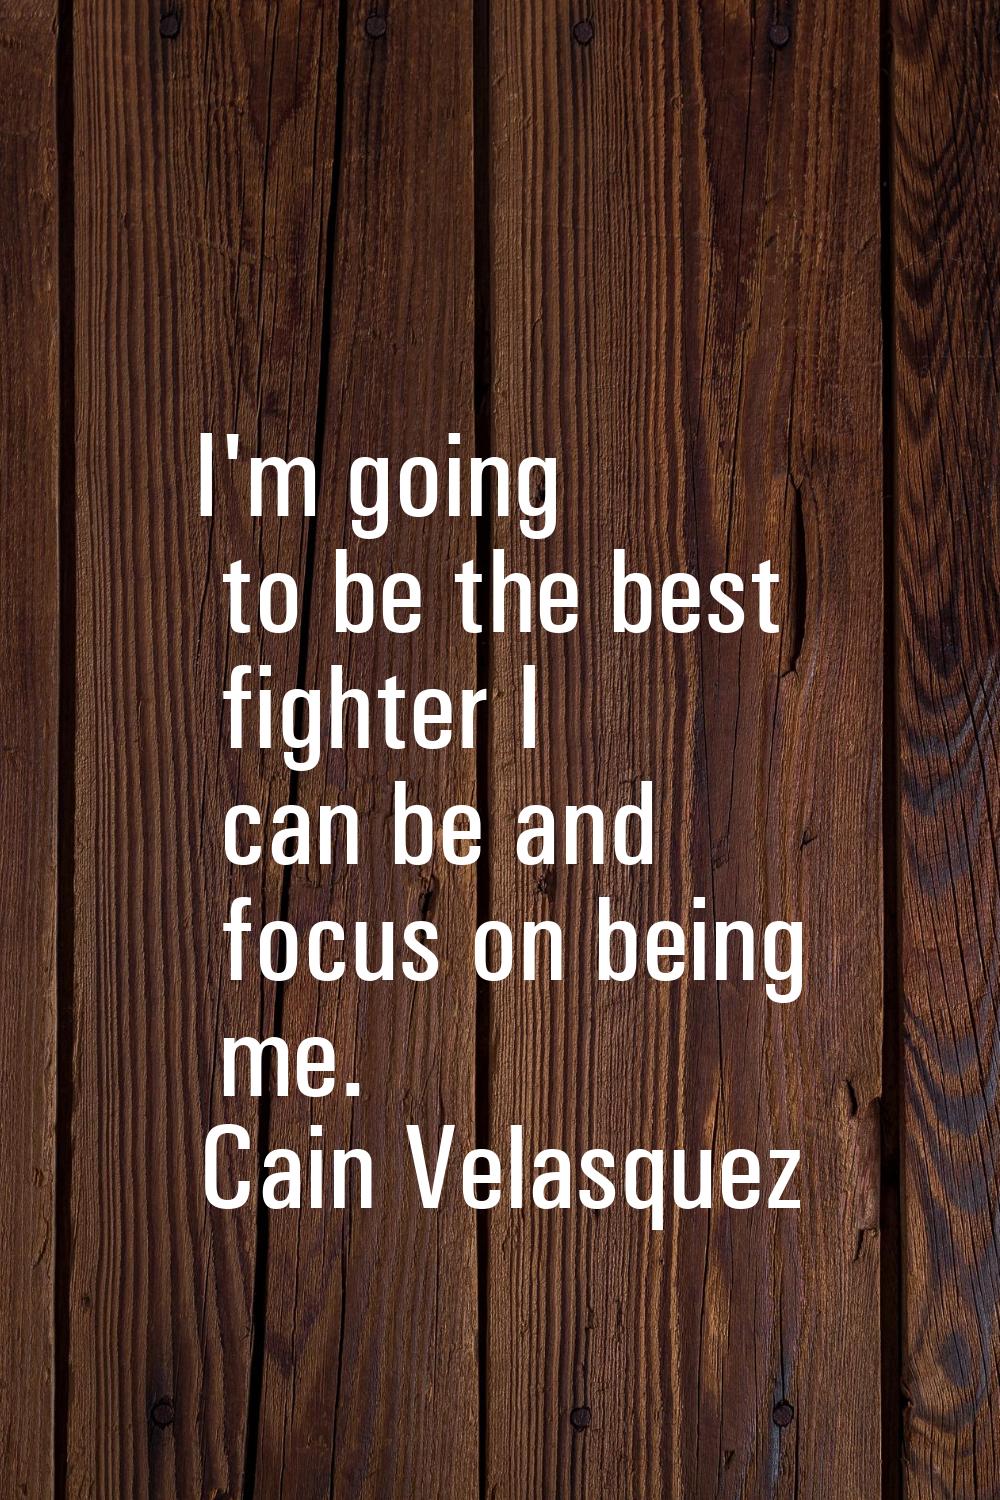 I'm going to be the best fighter I can be and focus on being me.